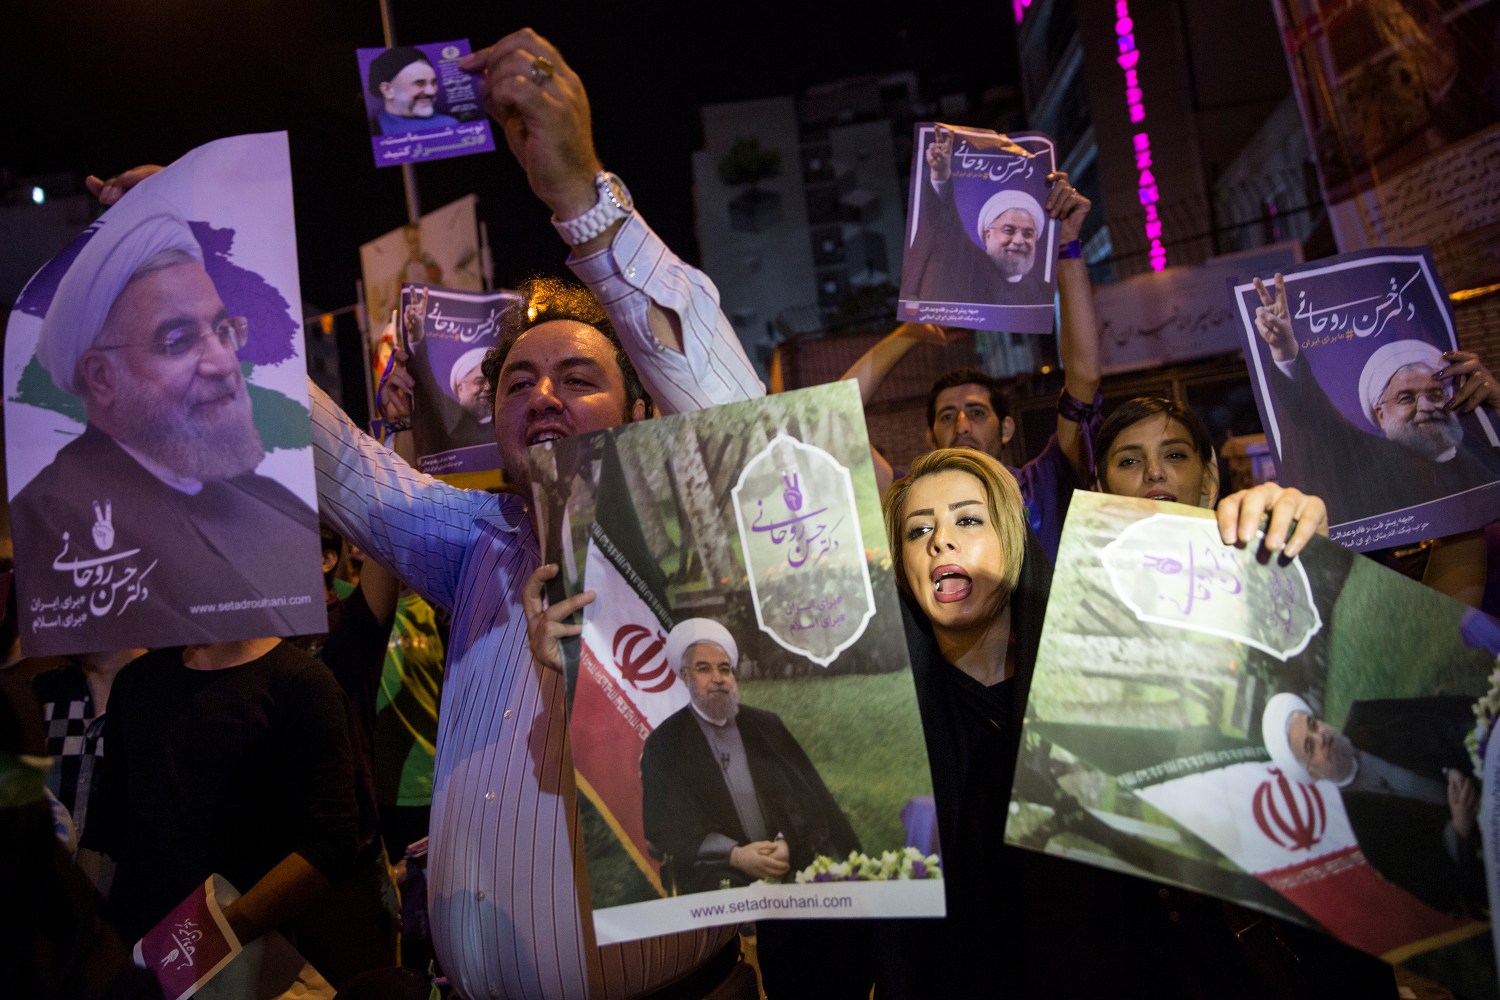 Supporters of Iran's President Hassan Rouhani hold his posters during a campaign rally in Tehran, Iran, May 17, 2017. Picture taken May 17, 2017. TIMA via Reuters ATTENTION EDITORS - THIS IMAGE WAS PROVIDED BY A THIRD PARTY. FOR EDITORIAL USE ONLY.